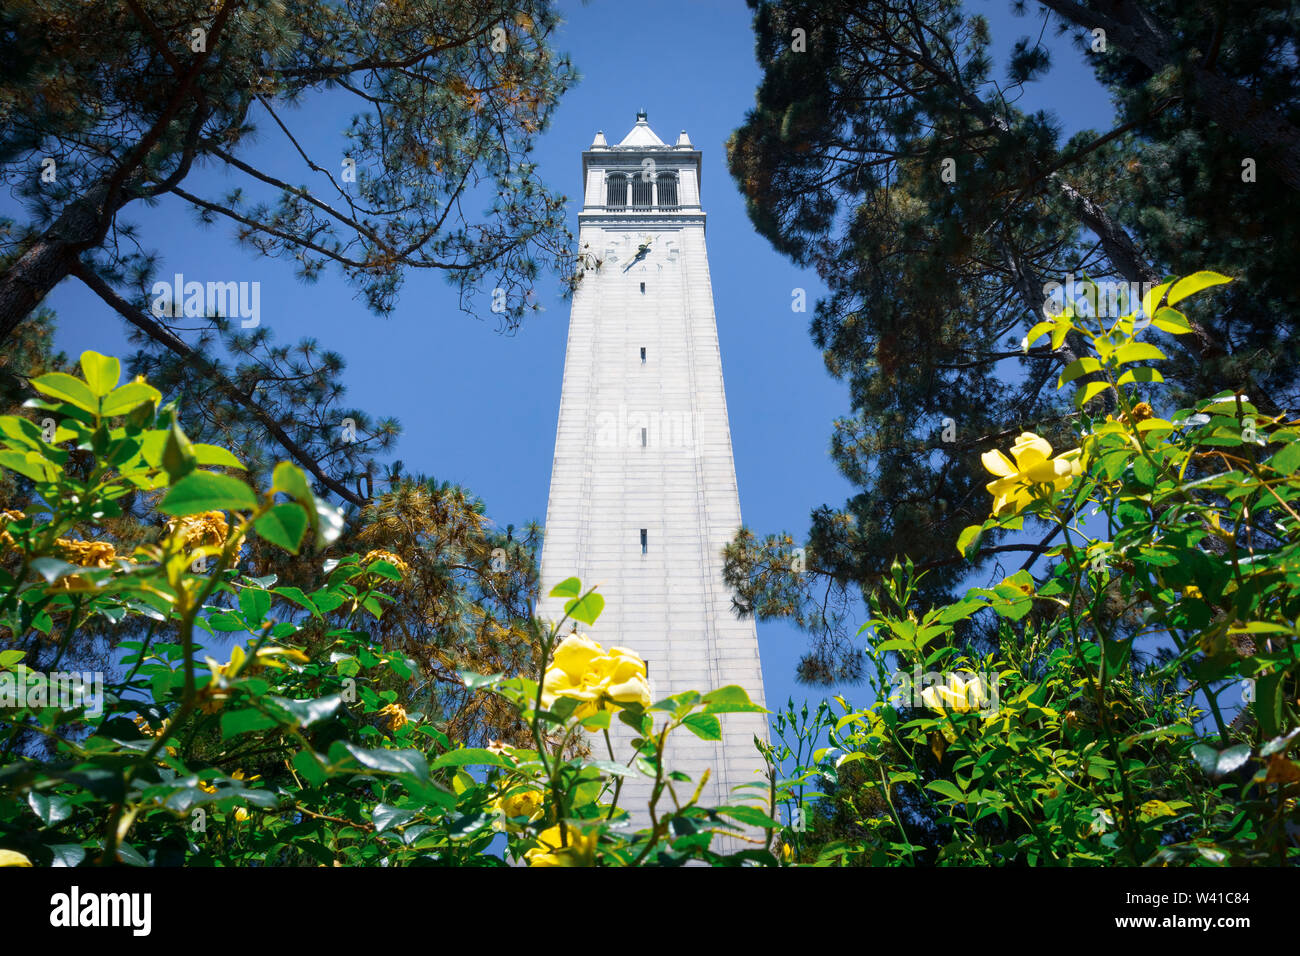 Looking up from the base of Sather tower (the Campanile) on a blue sky background, UC Berkeley, San Francisco bay, California Stock Photo